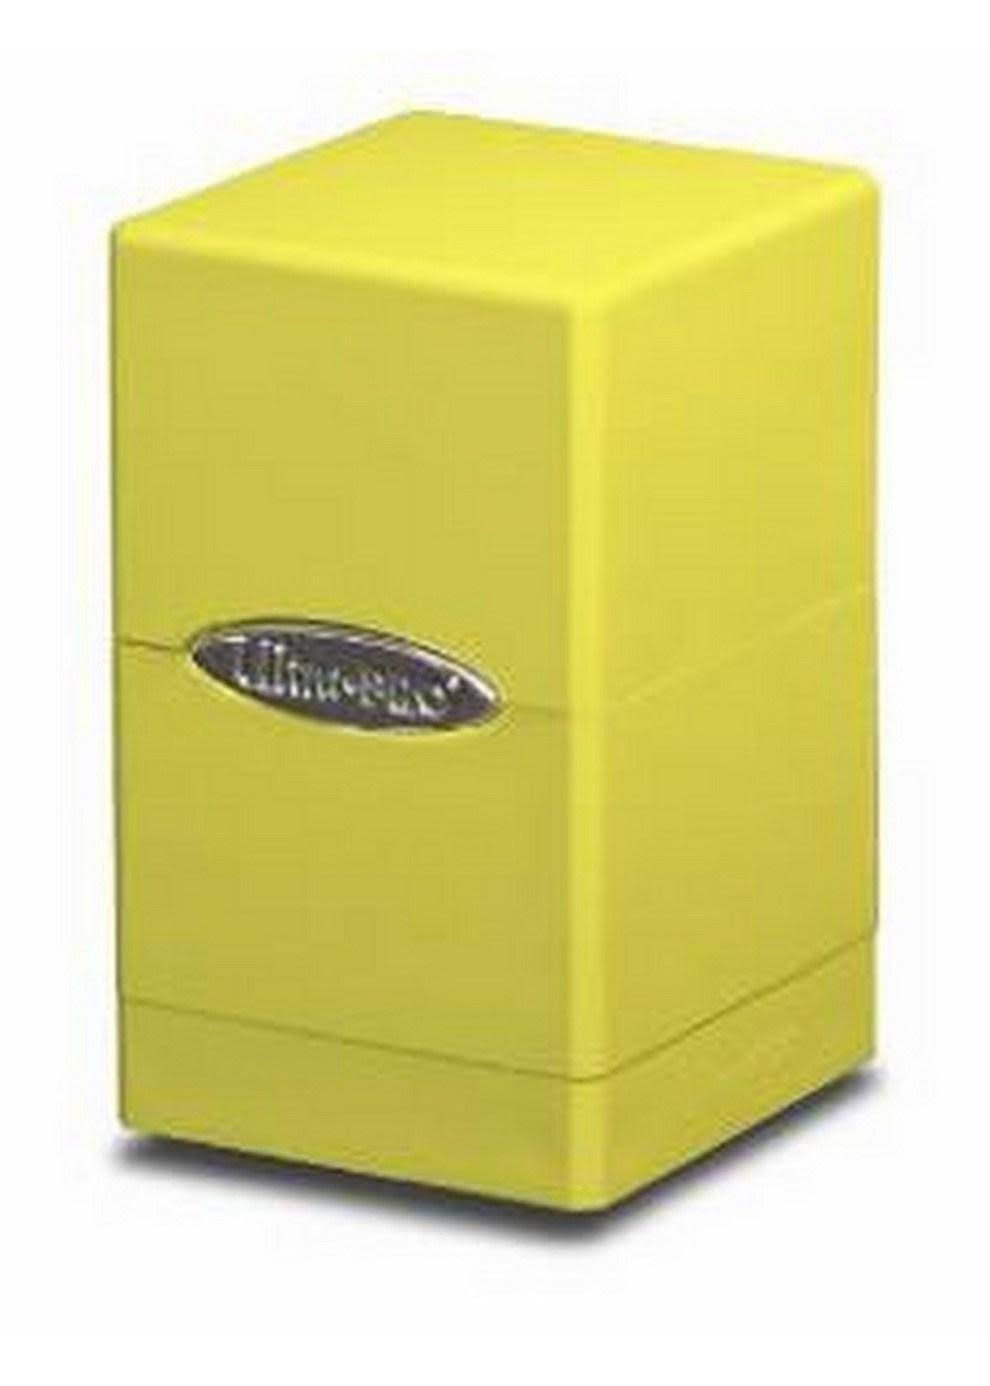 Ultra Pro Satin Tower Deck Box - Holds 100 Sleeved Cards, Bright Yellow